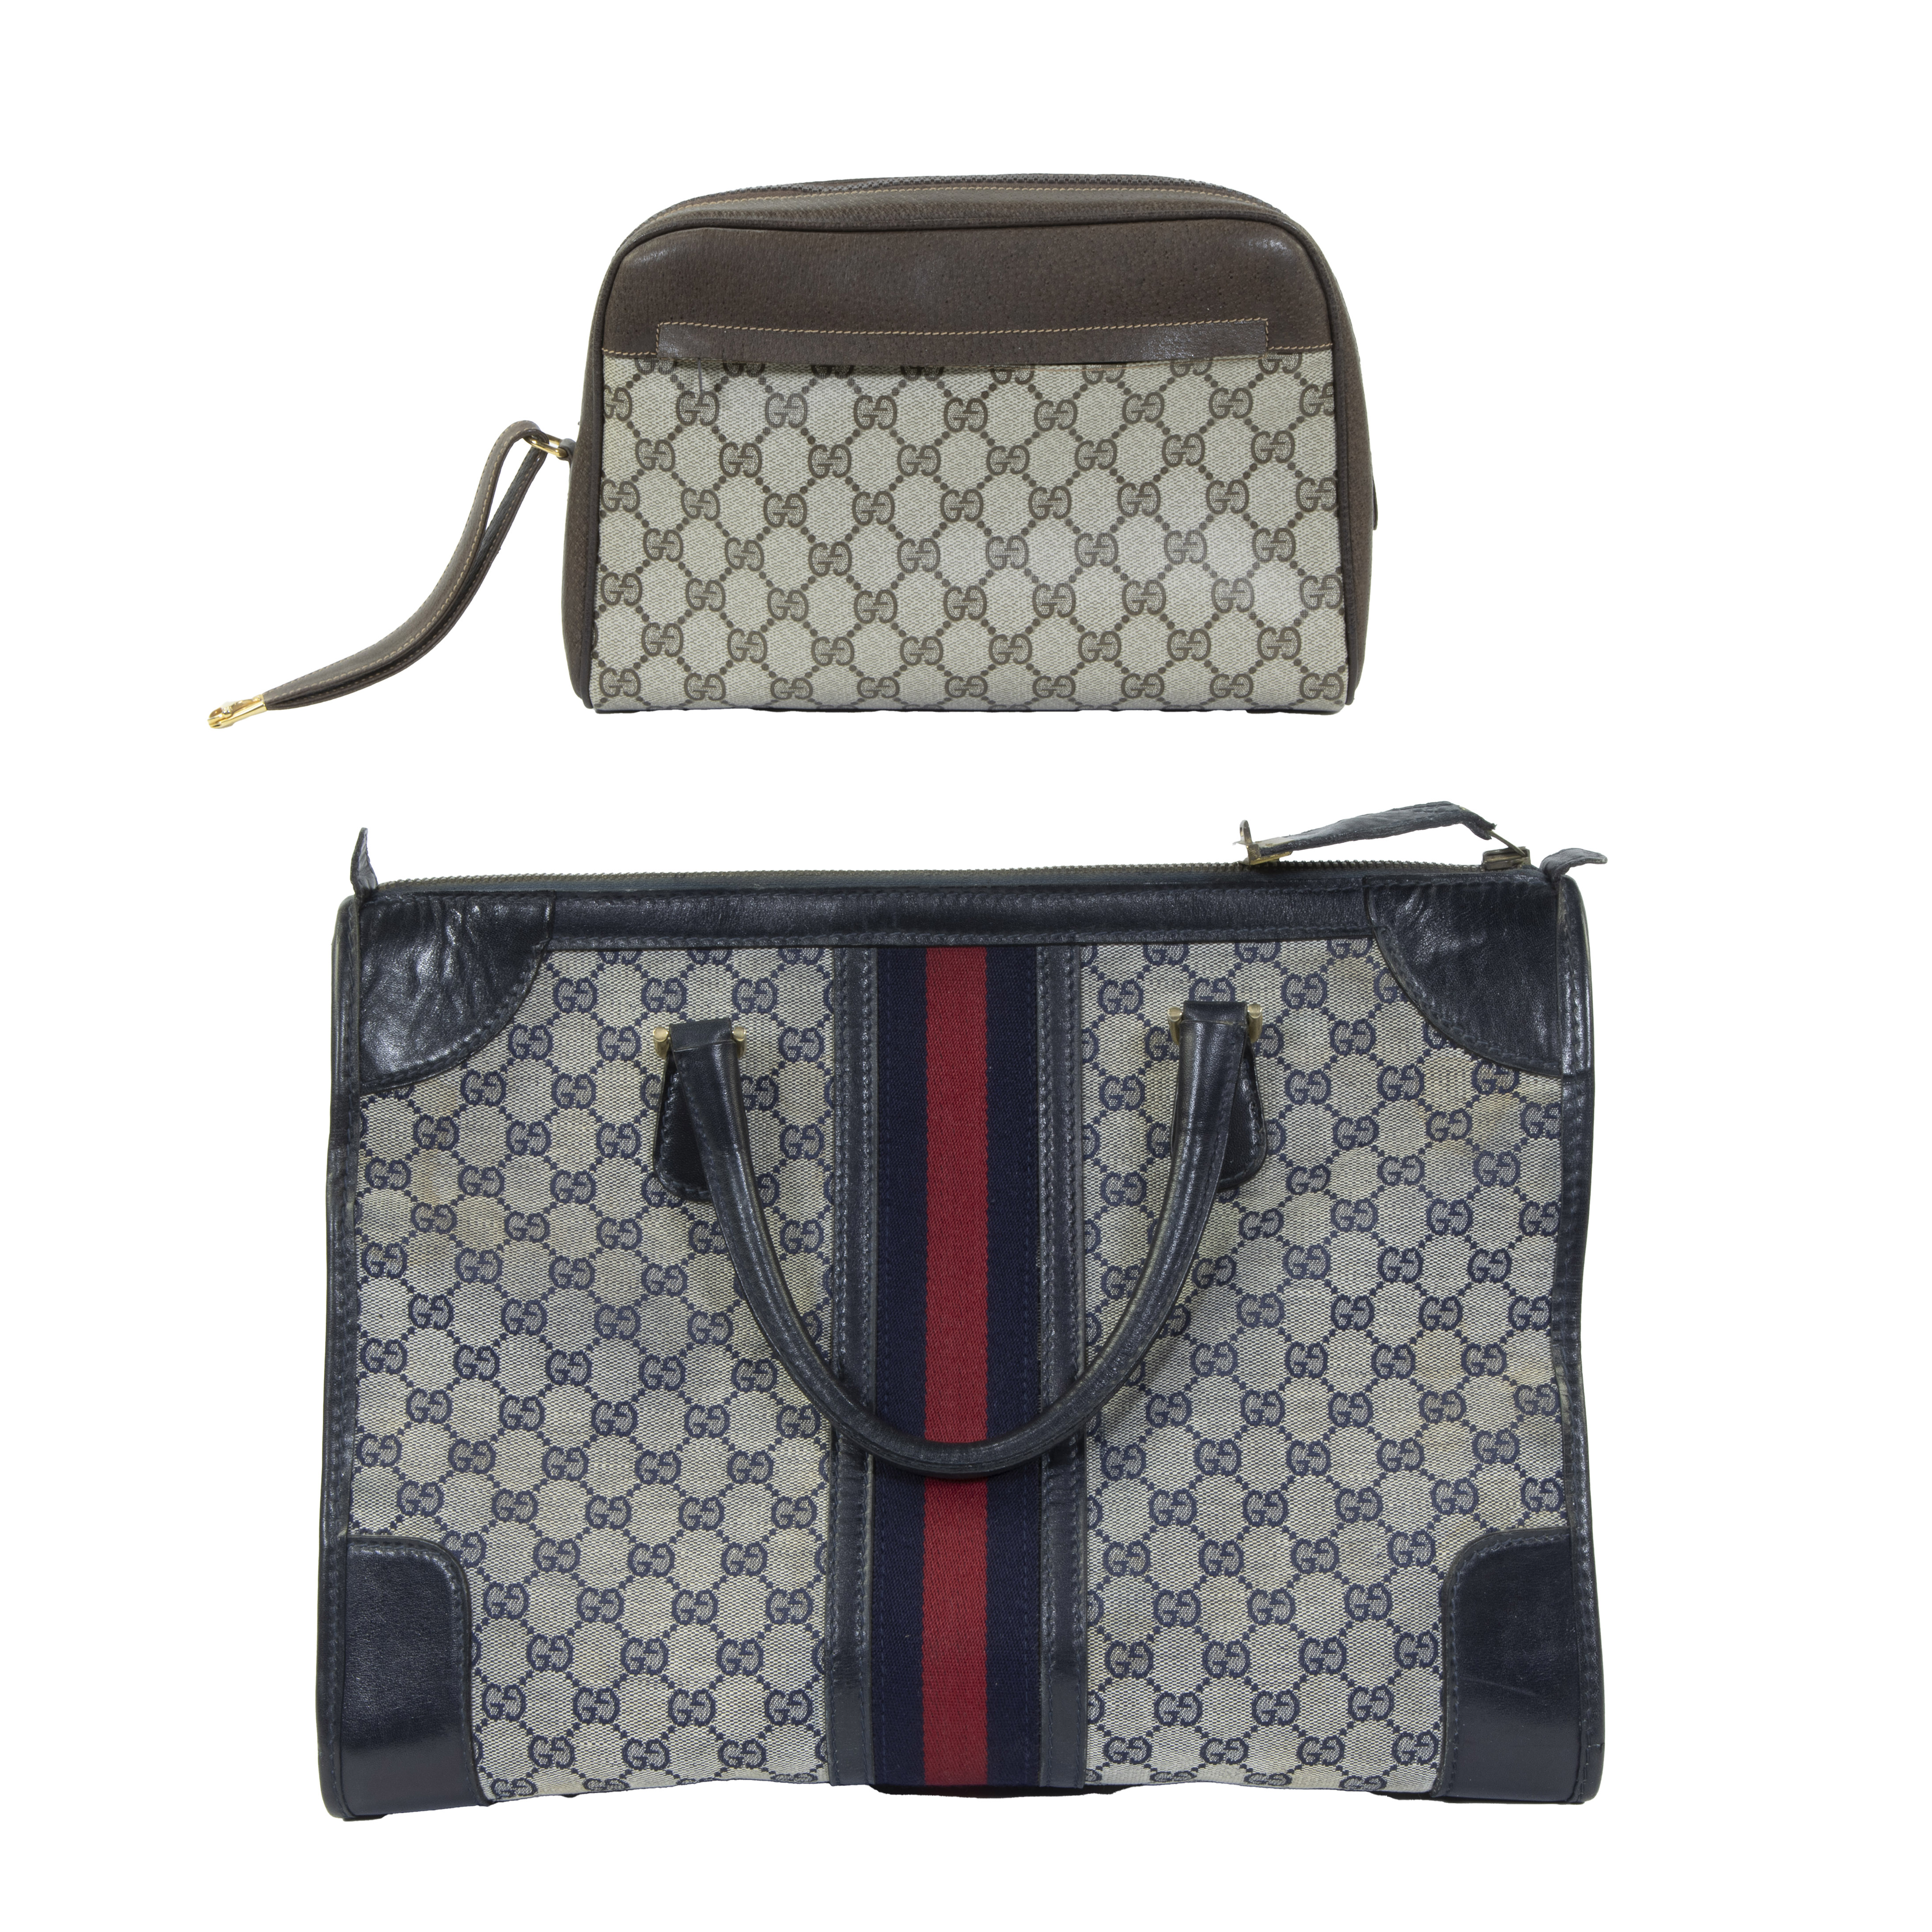 Gucci travel bag and pouch